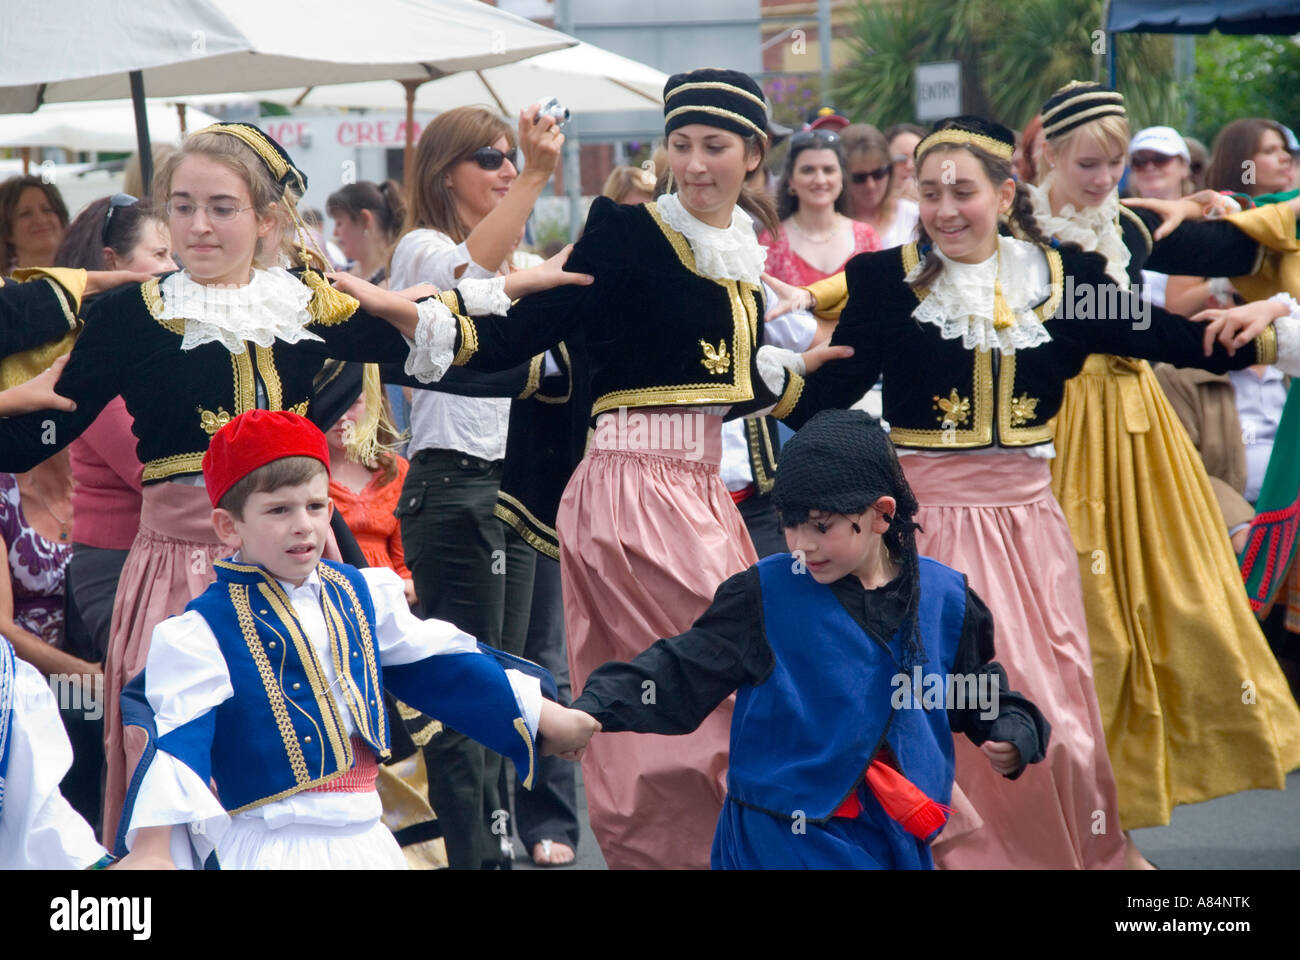 Australians of Greek descent celebrate at a festival with dancing in traditional costume Stock Photo